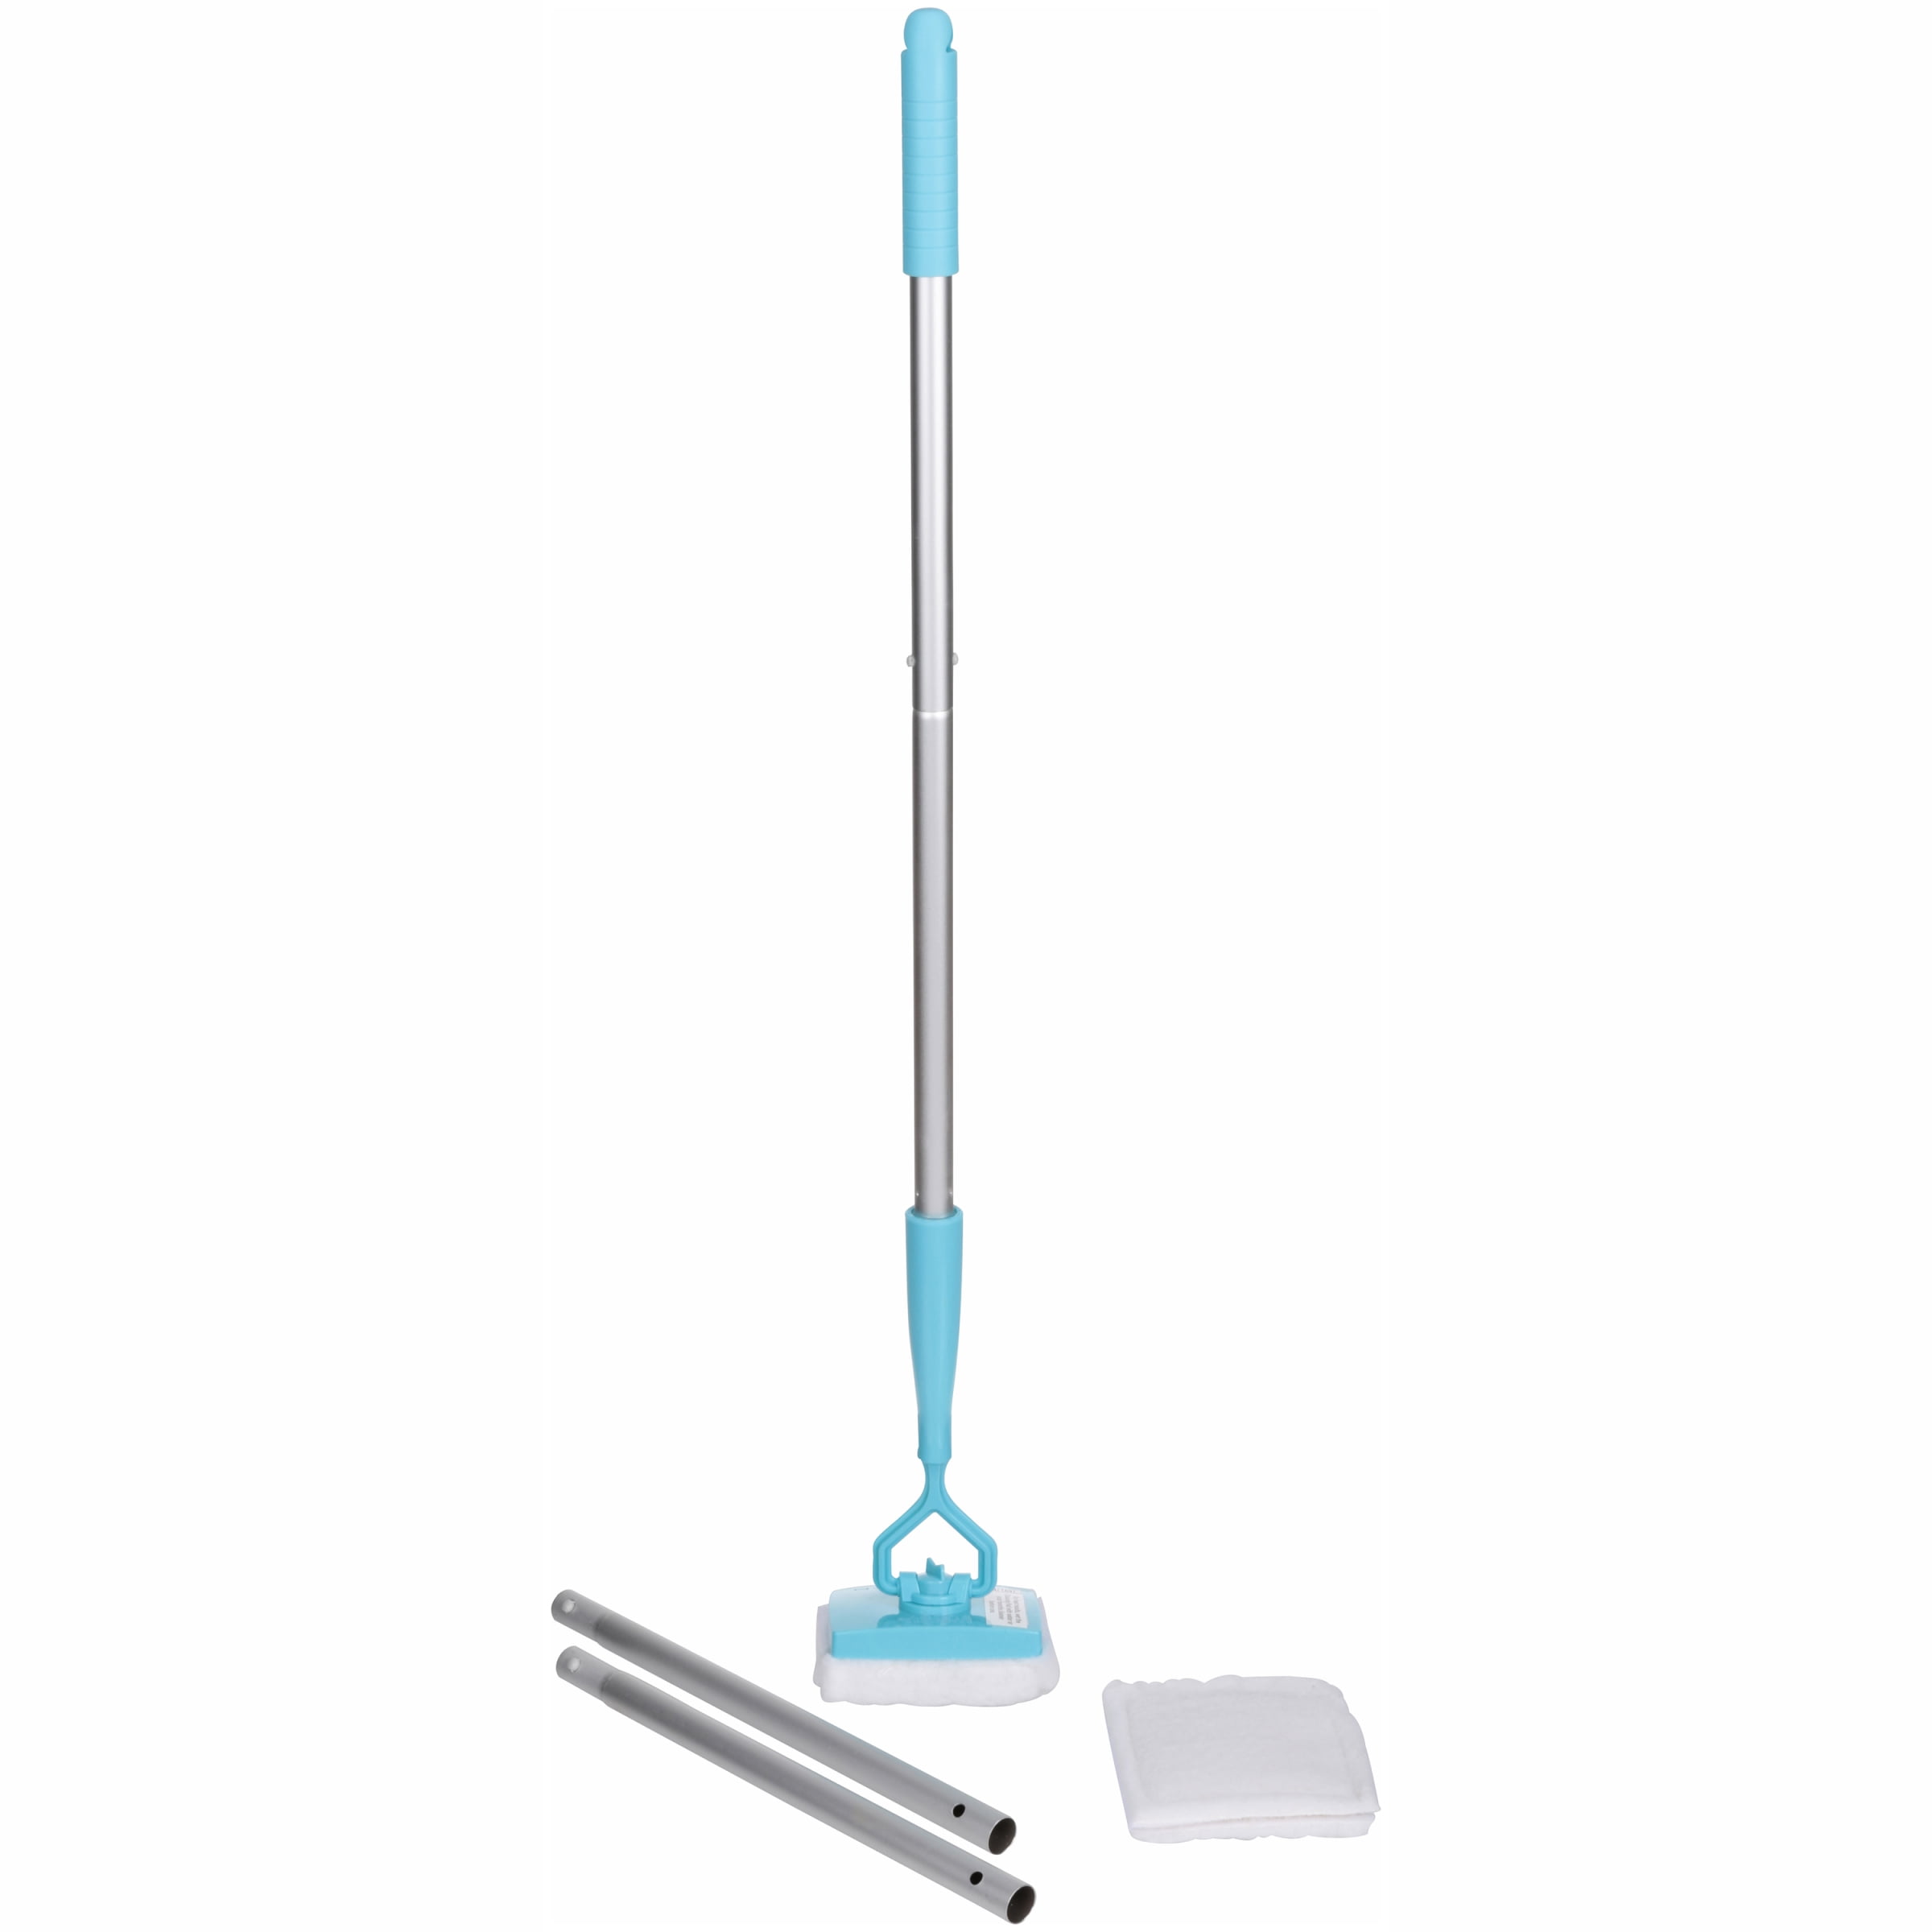 A Review of the Fast and Easy Baseboard Buddy Cleaning Tool